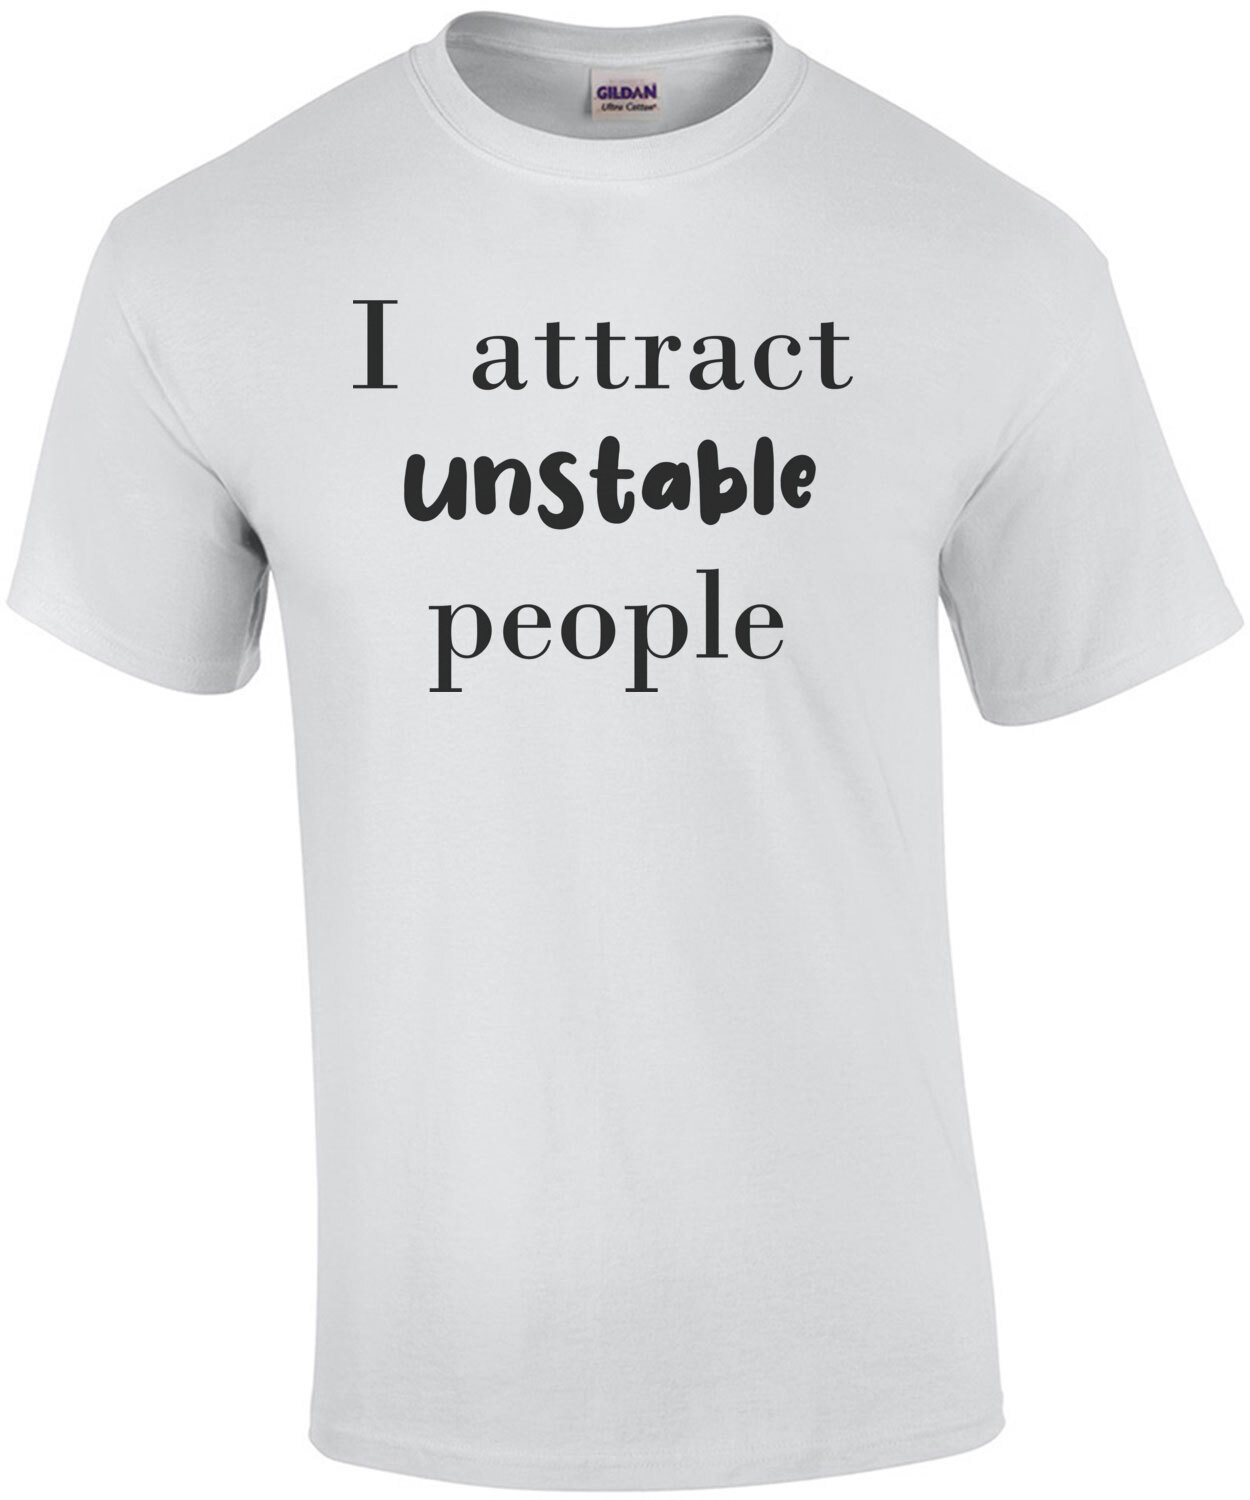 I attract unstable people T-Shirt